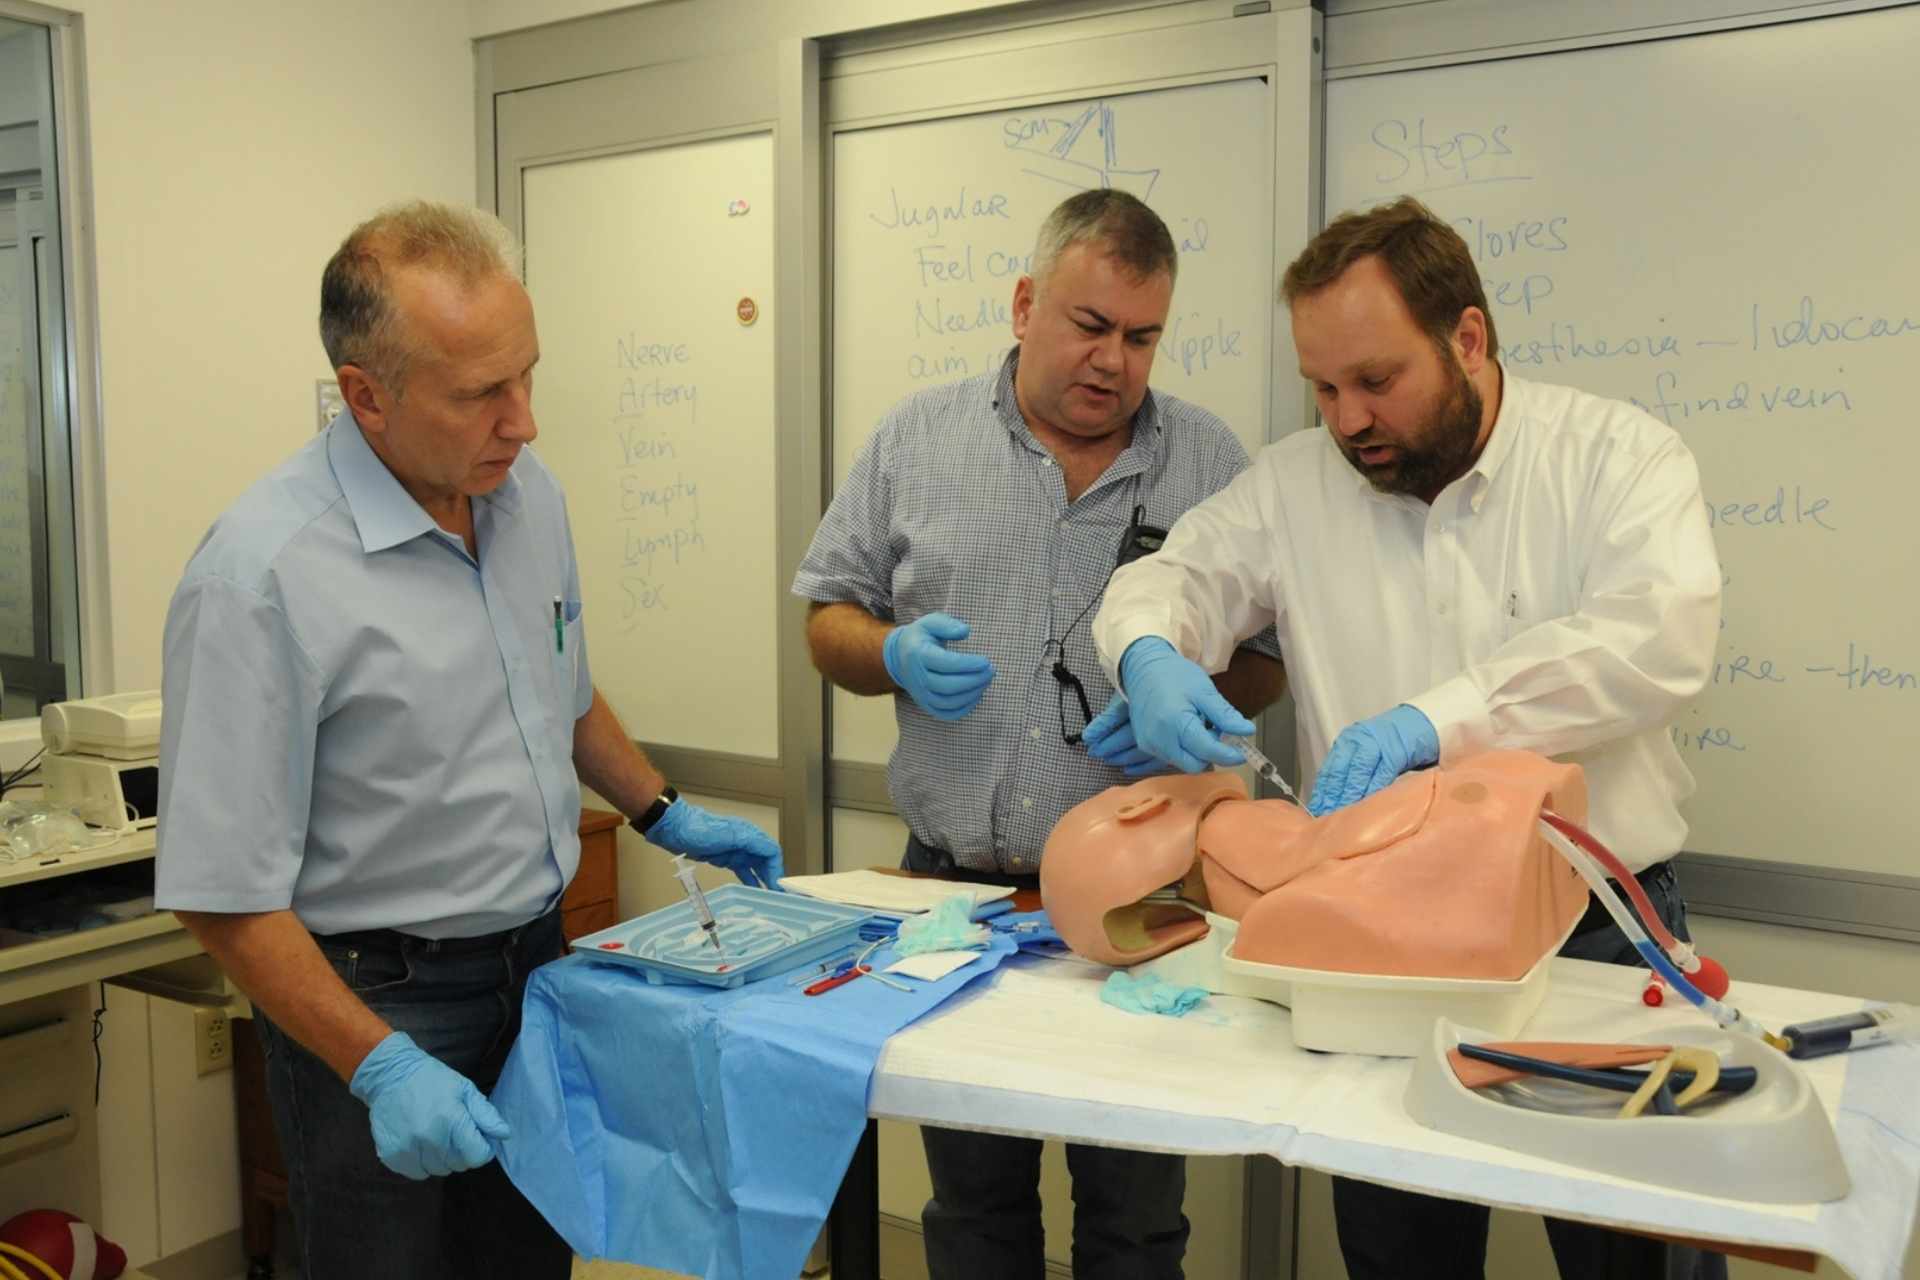 A group of Ukrainian trauma surgeons participate in Advanced Trauma Life Support and Rural Trauma Team Development Course training at West Virginia University in 2013 as part of a collaboration with the American College of Surgeons and the World Federation of Ukrainian Medical Associations in the United States.